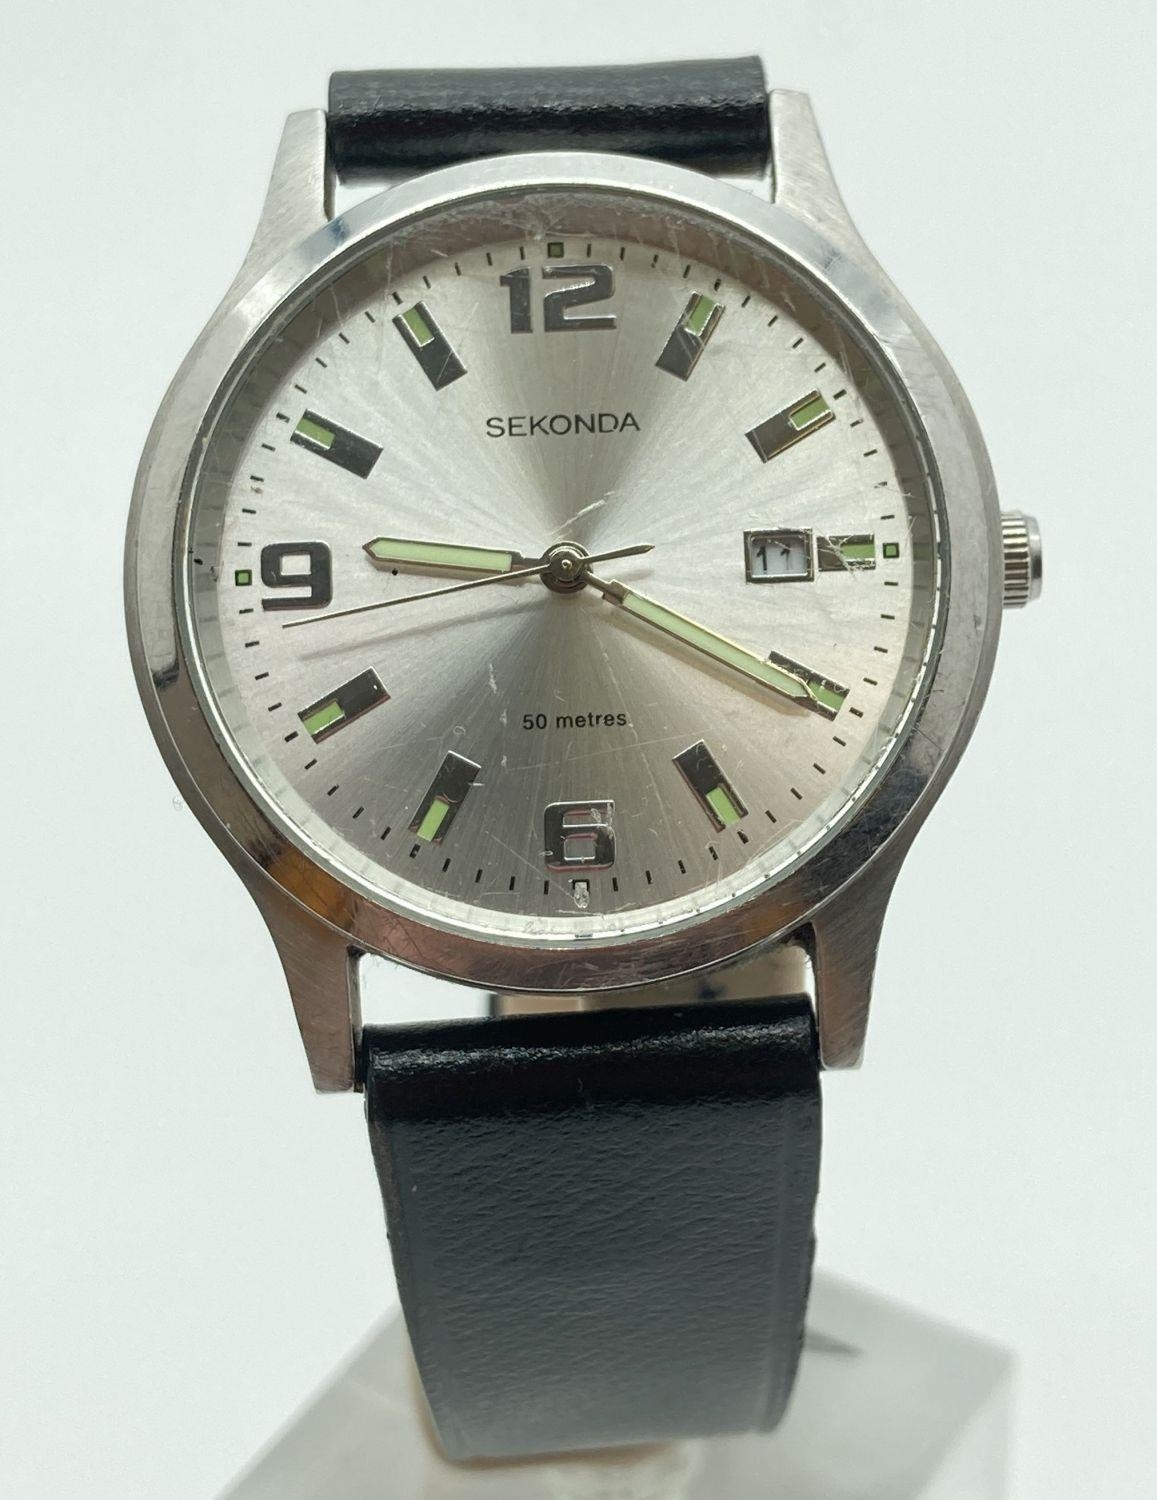 A men's Sekonda wristwatch with stainless steel case and black leather strap. Silver tone face